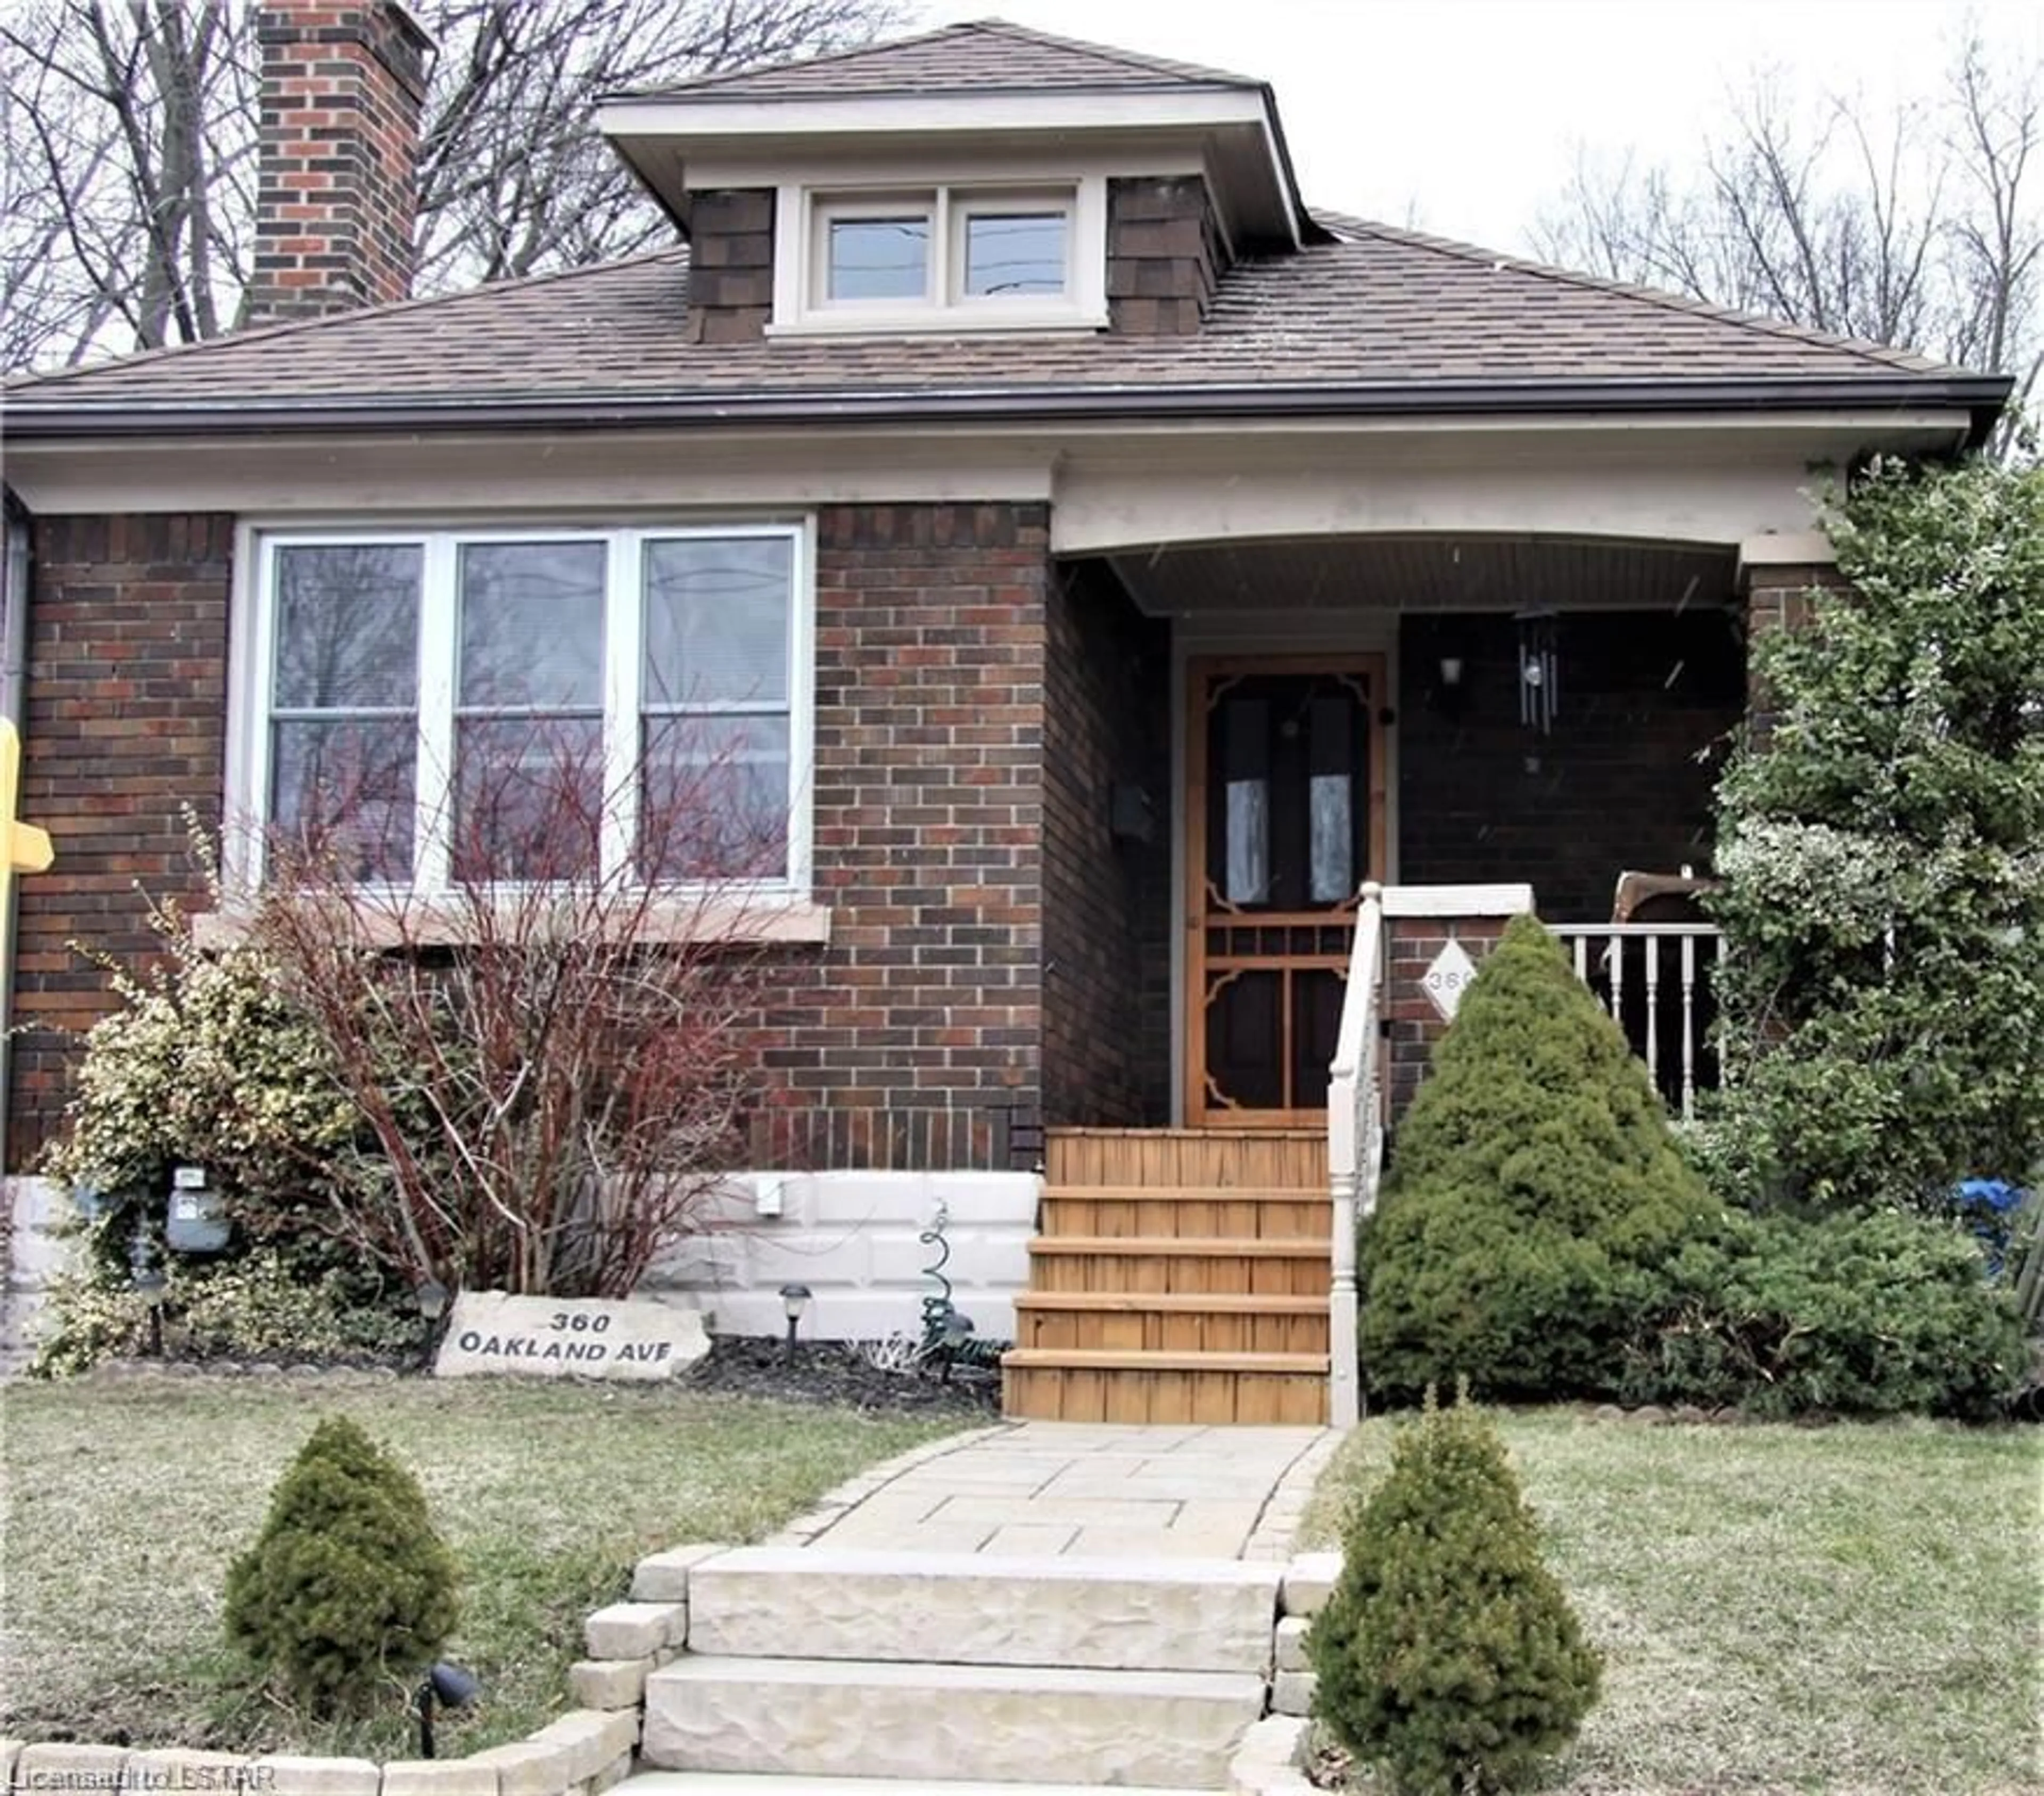 Home with brick exterior material for 360 Oakland Ave, London Ontario N5W 4J9